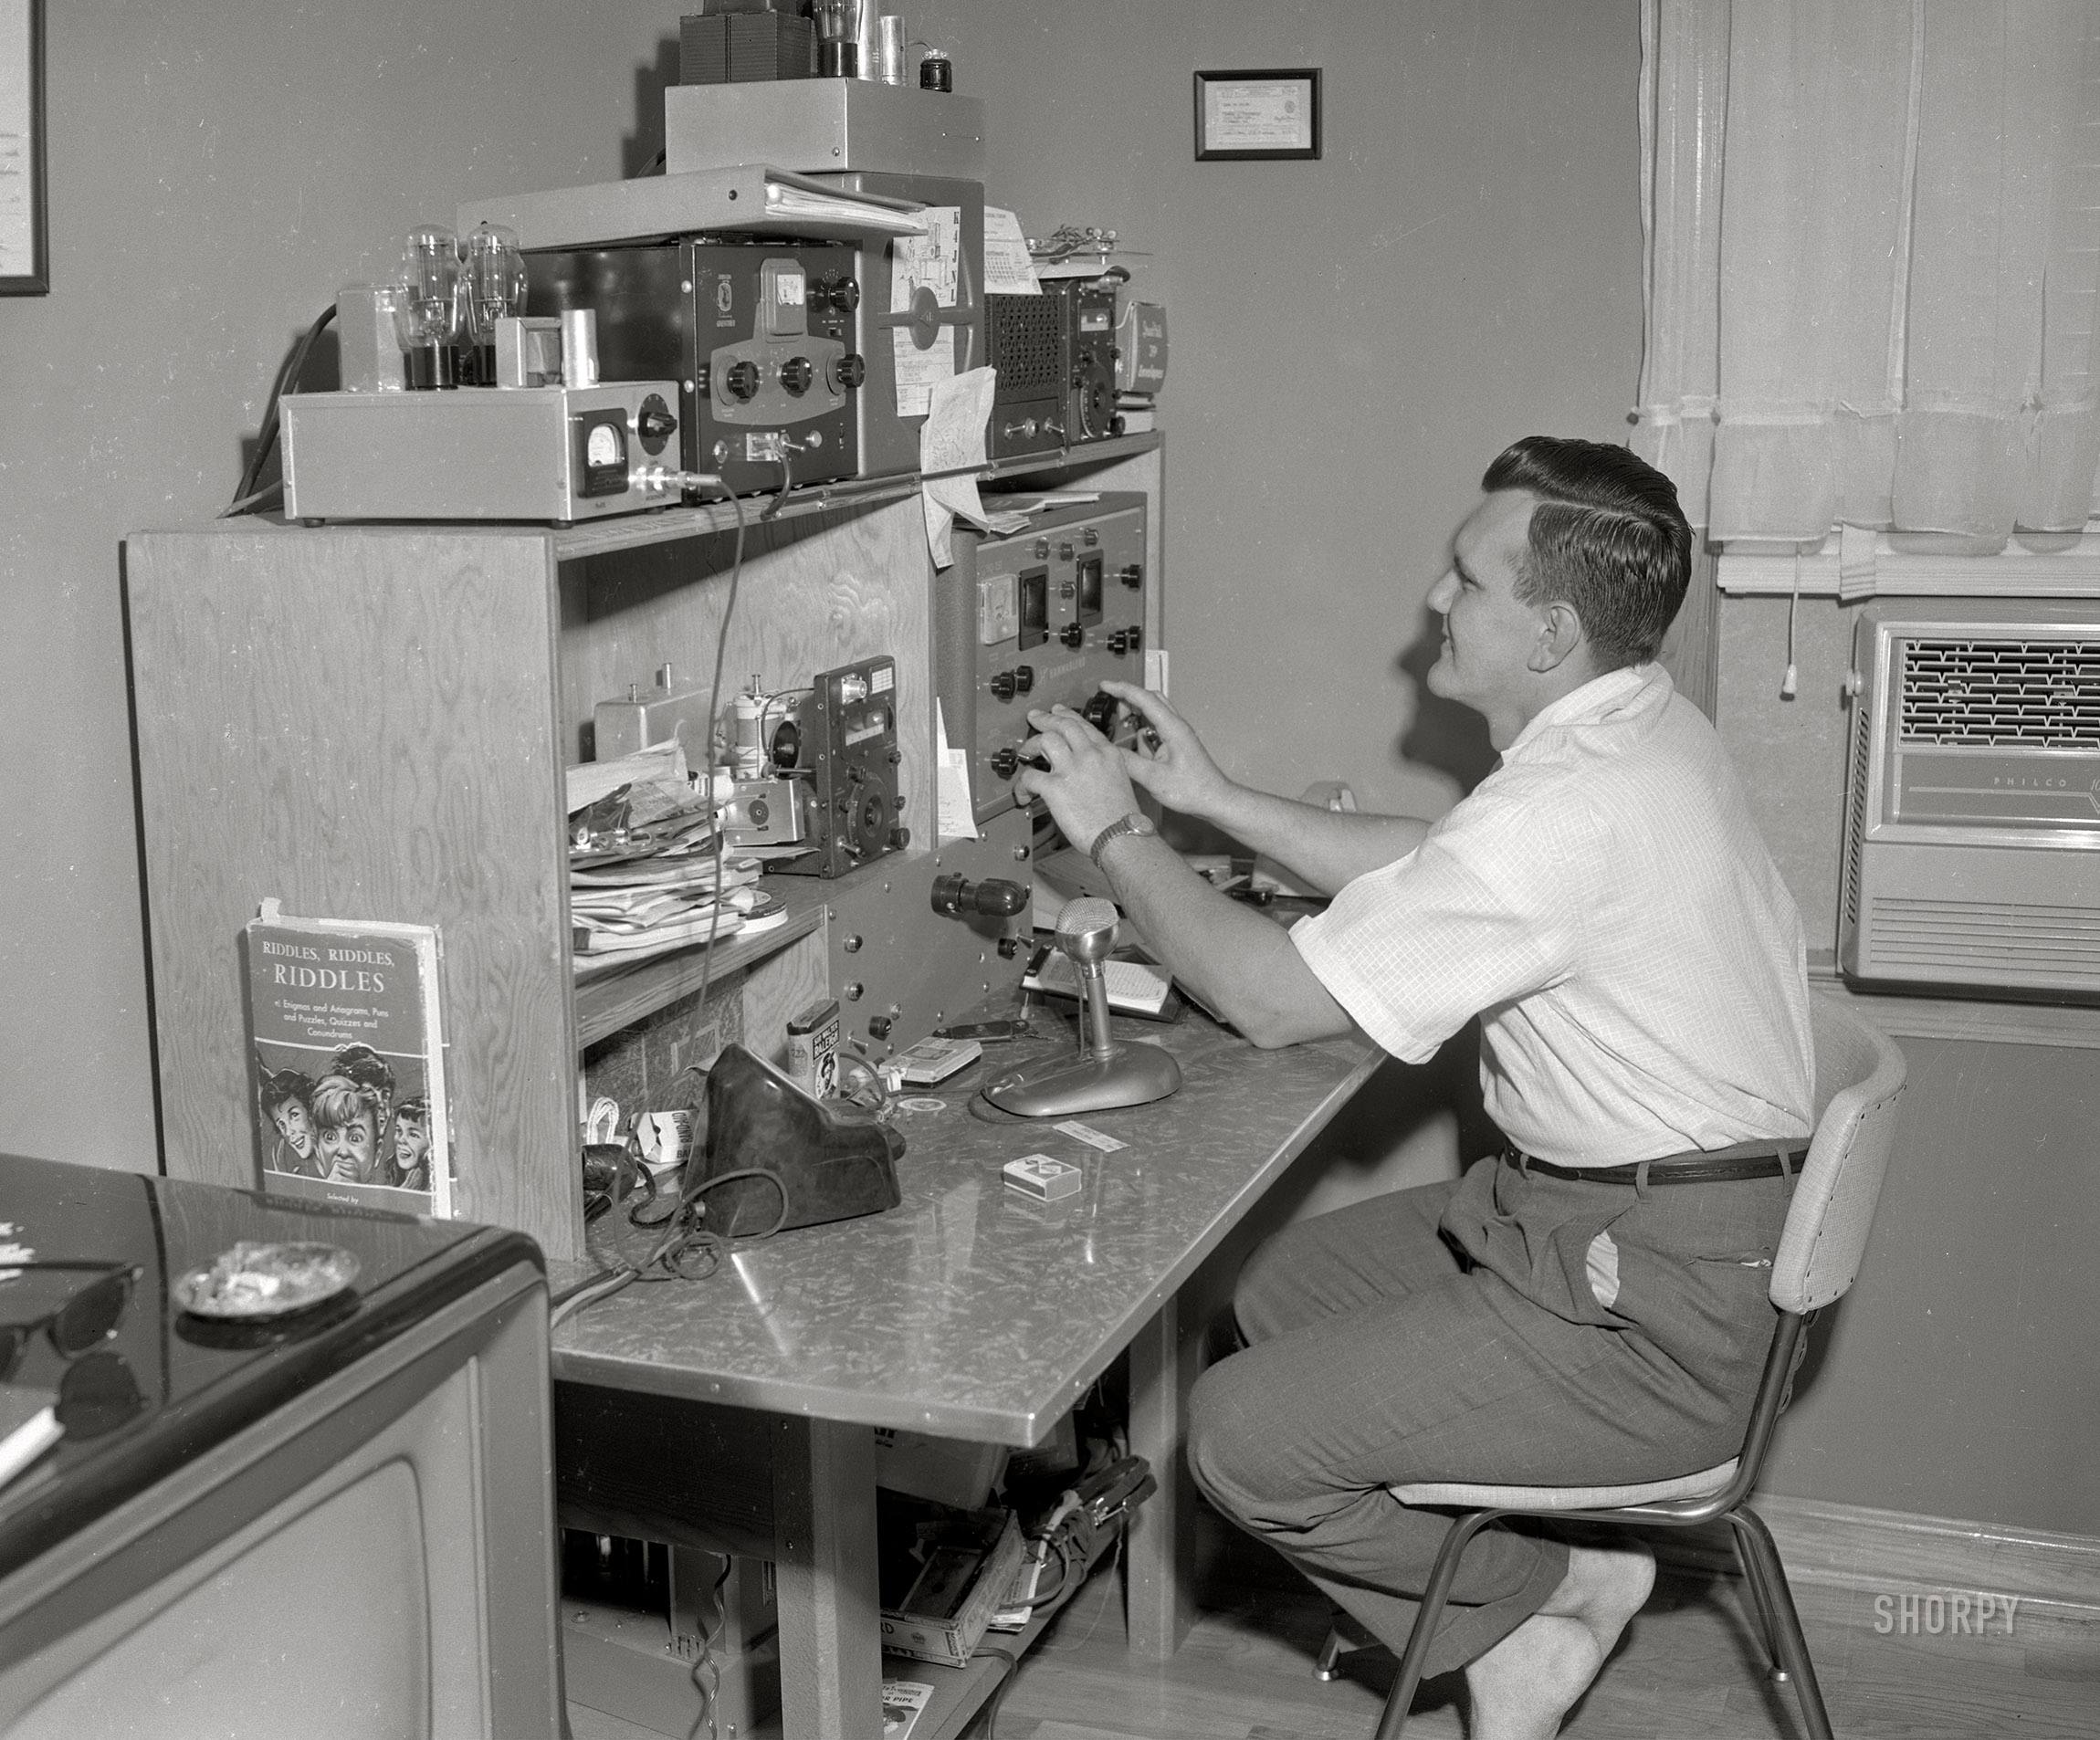 From September 1957 in Columbus, Georgia, comes this next entry from the Amateur Radio file, starring K4JNL (Eddy Kosobucki). Plus: Riddles, Riddles, RIDDLES. Air conditioning by Philco. 4x5 inch acetate negative from the Shorpy News Photo Archive. View full size.